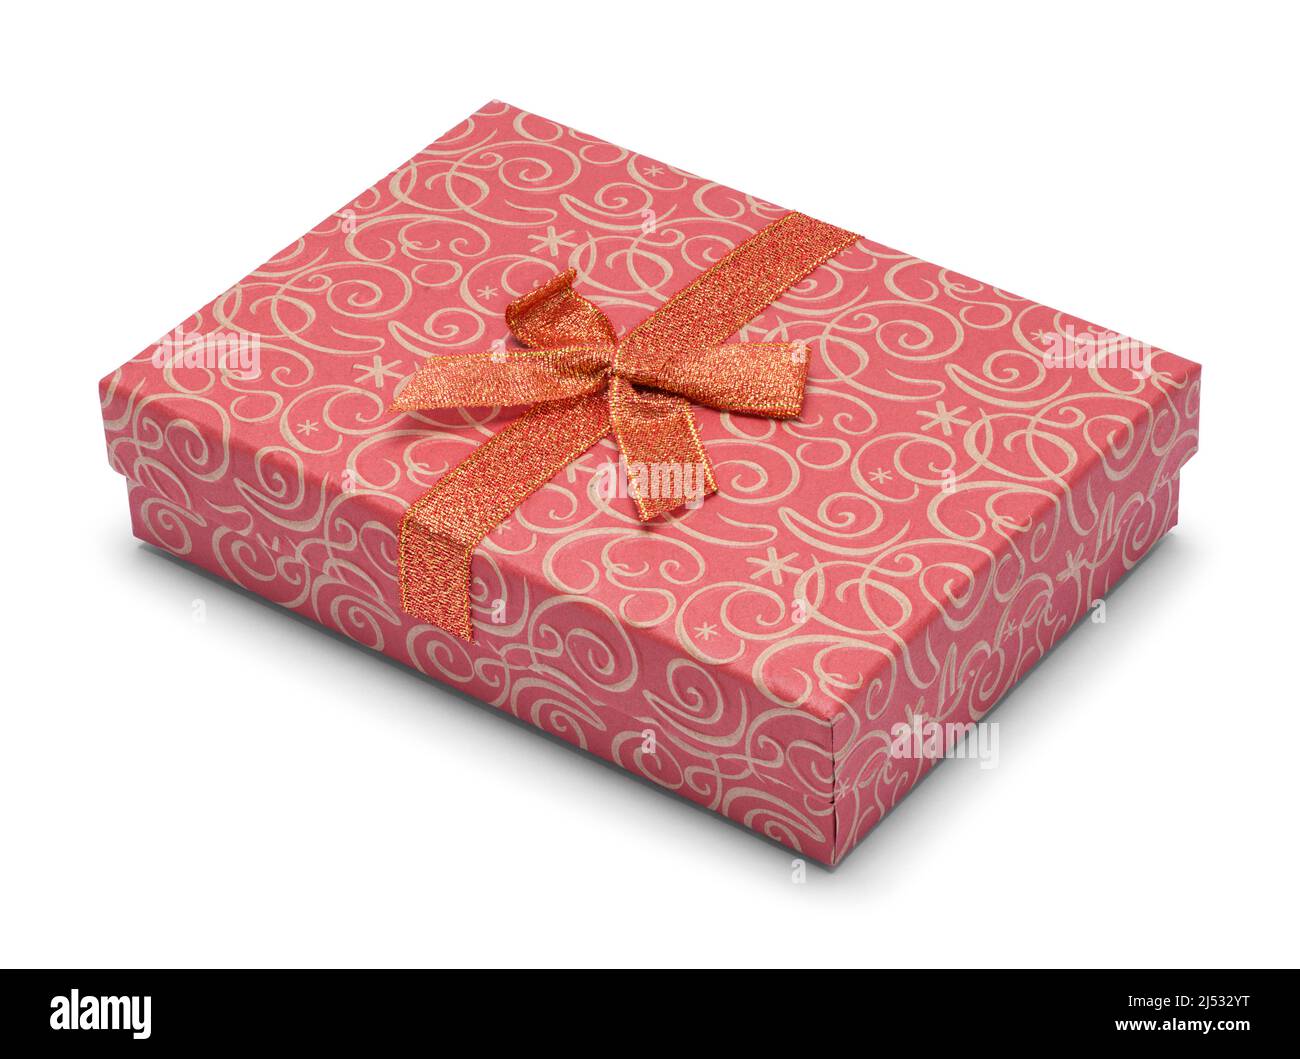 Flat Red Gift Box Cut Out on White. Stock Photo